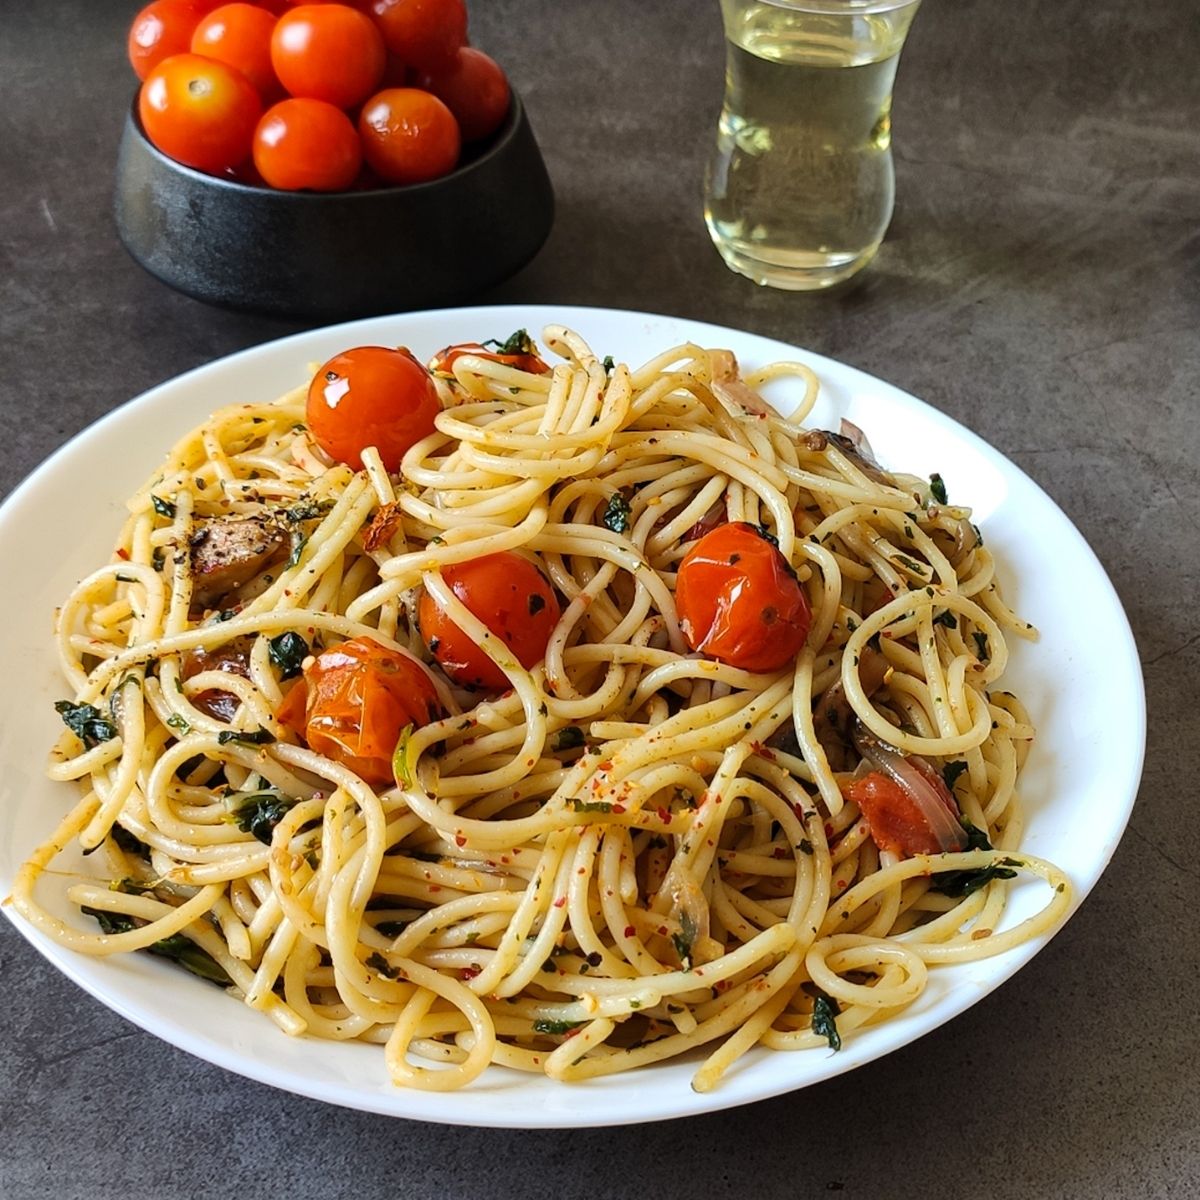 Cherry tomato pasta served in a white plate with a bowl of tomatoes and olive oil in the background